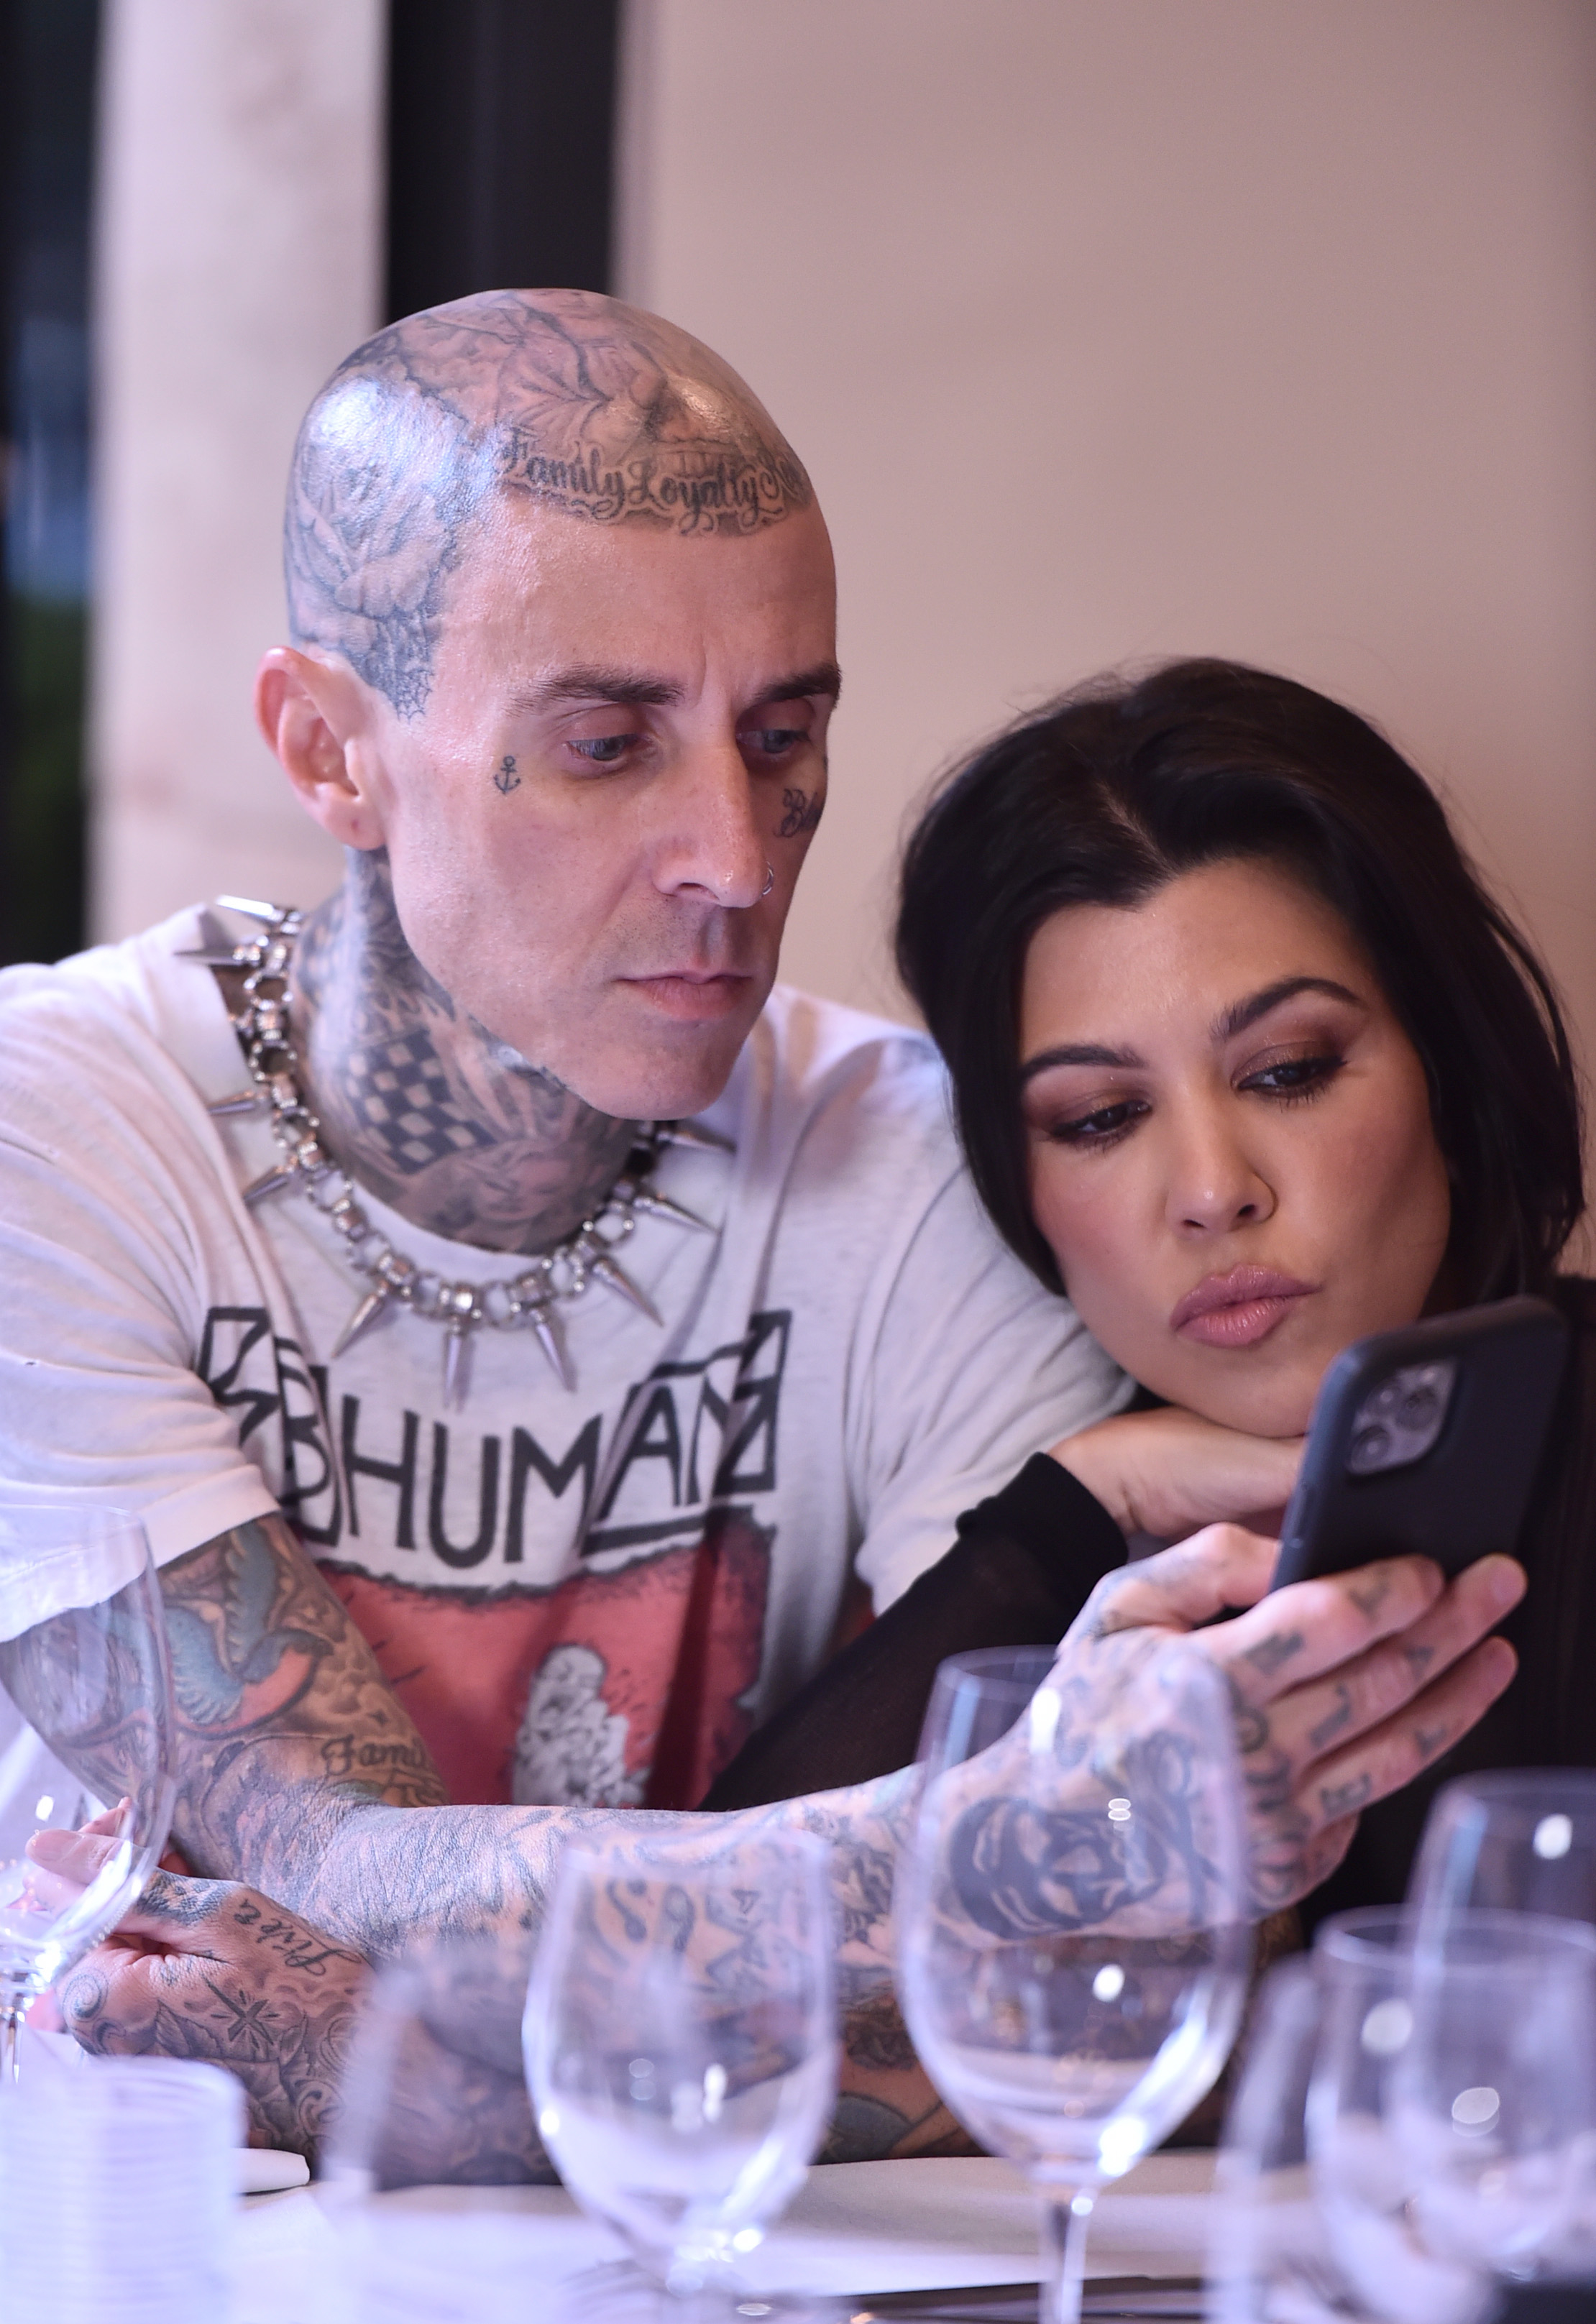 Travis Barker and Kourtney Kardashian looking closely at a smartphone screen